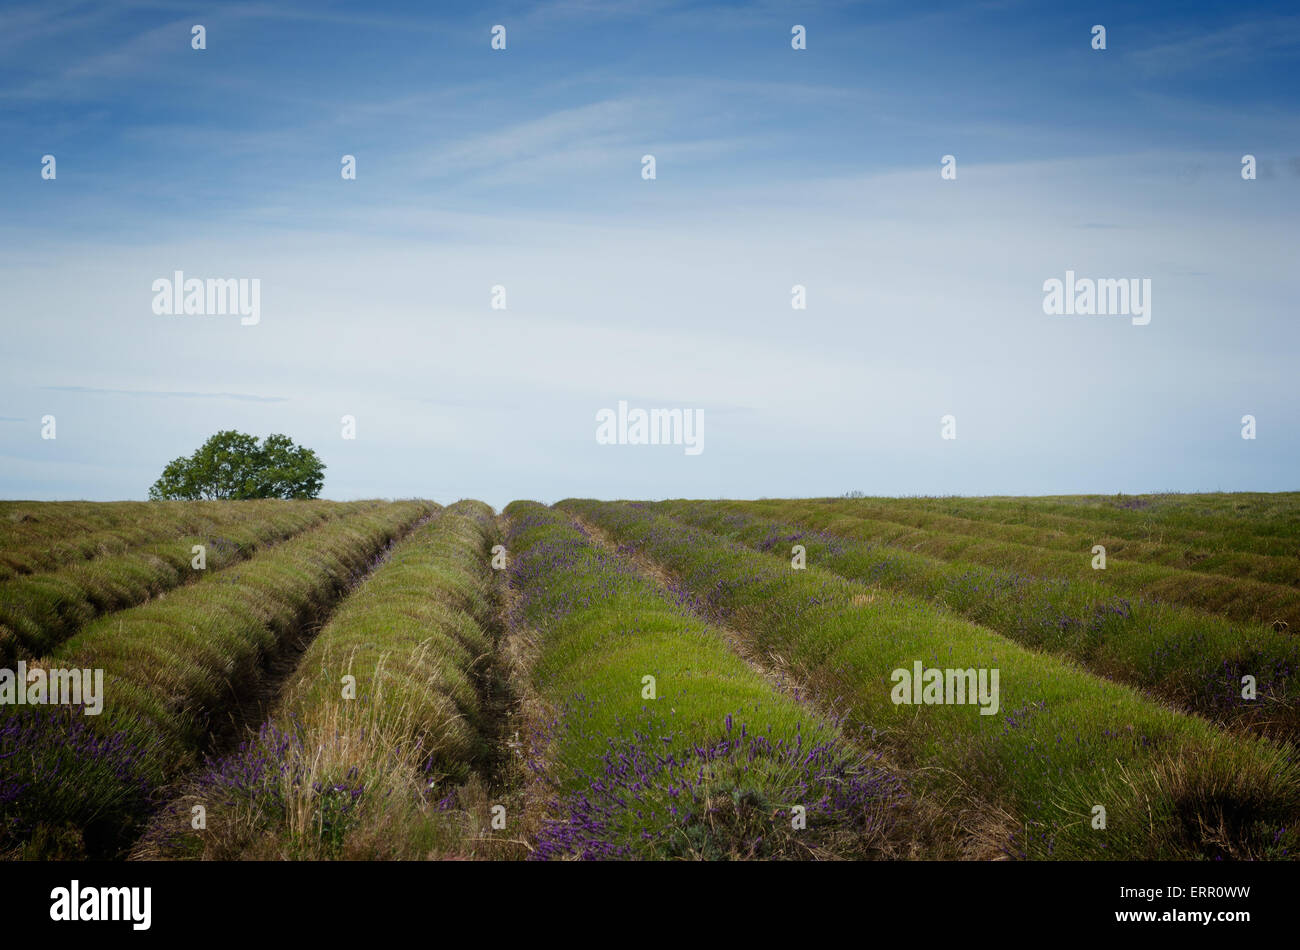 Straight rows of lavendar plants in a field after harvest. Stock Photo